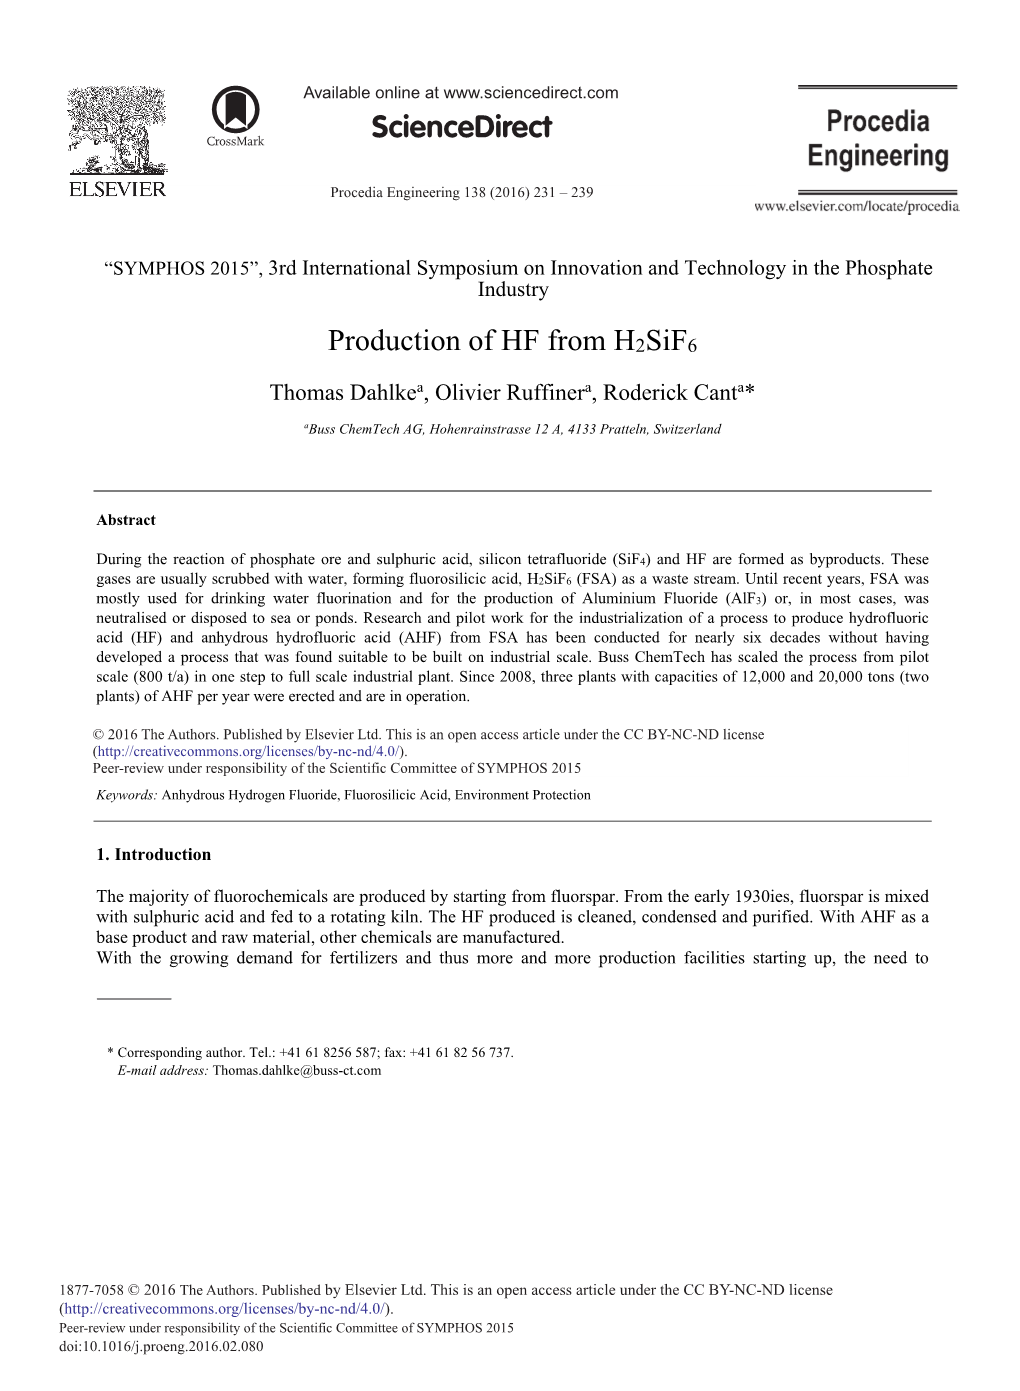 Production of HF from H2sif6